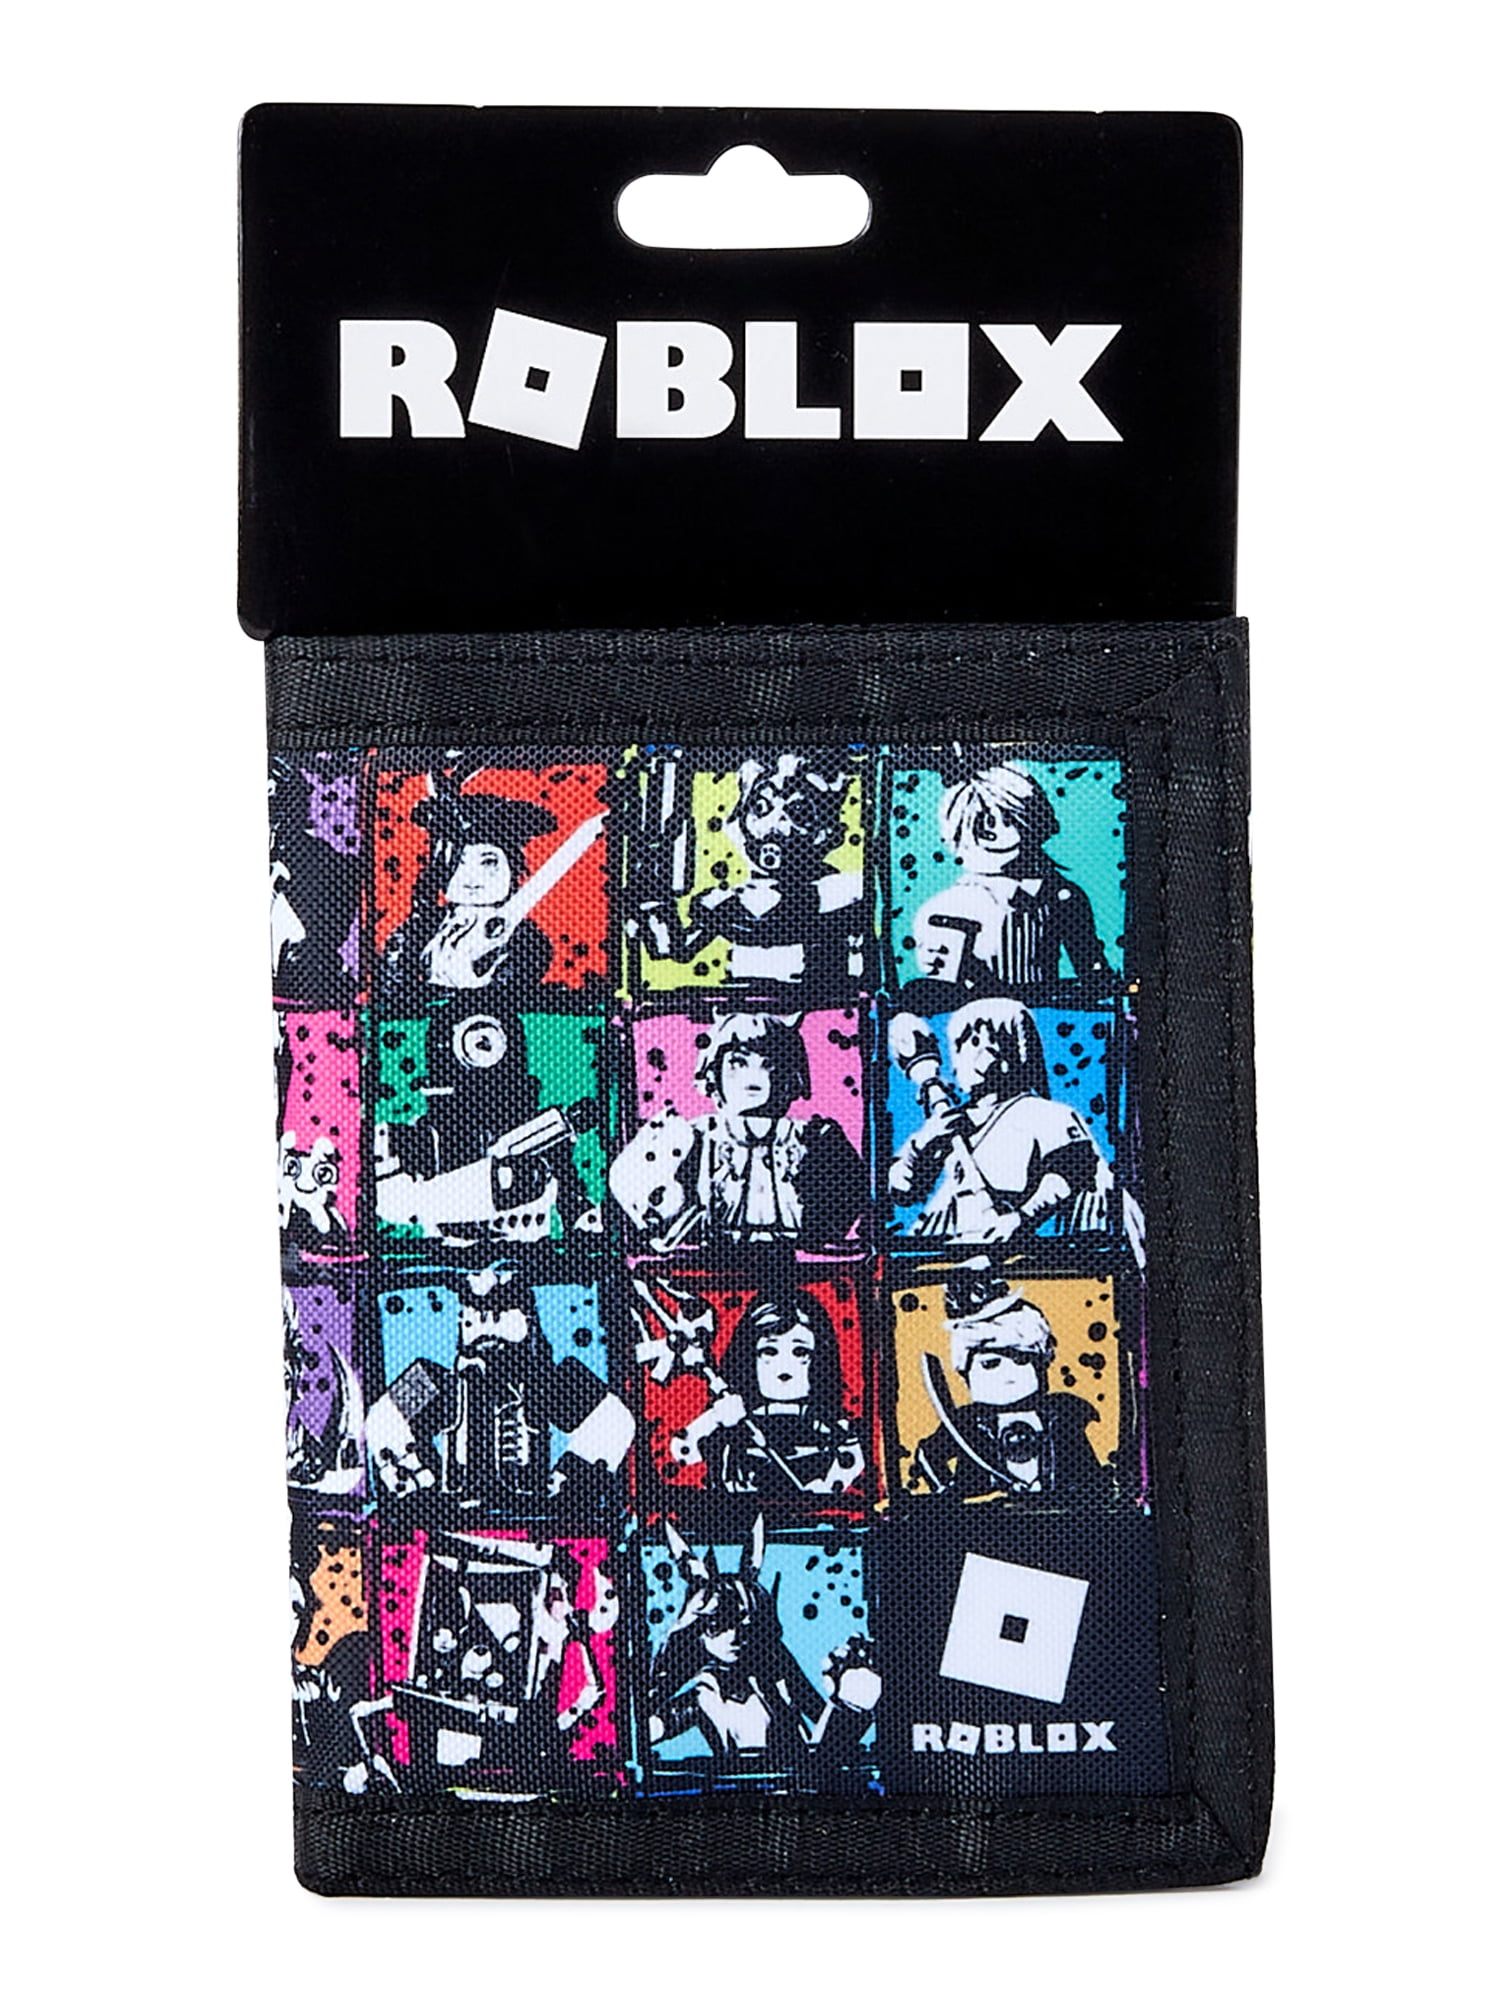 Roblox Wallet Black Simple Fashion Trend Student Wallet Cartoon Cute Men's  Coin Storage Bag Children's Toys Gifts - AliExpress